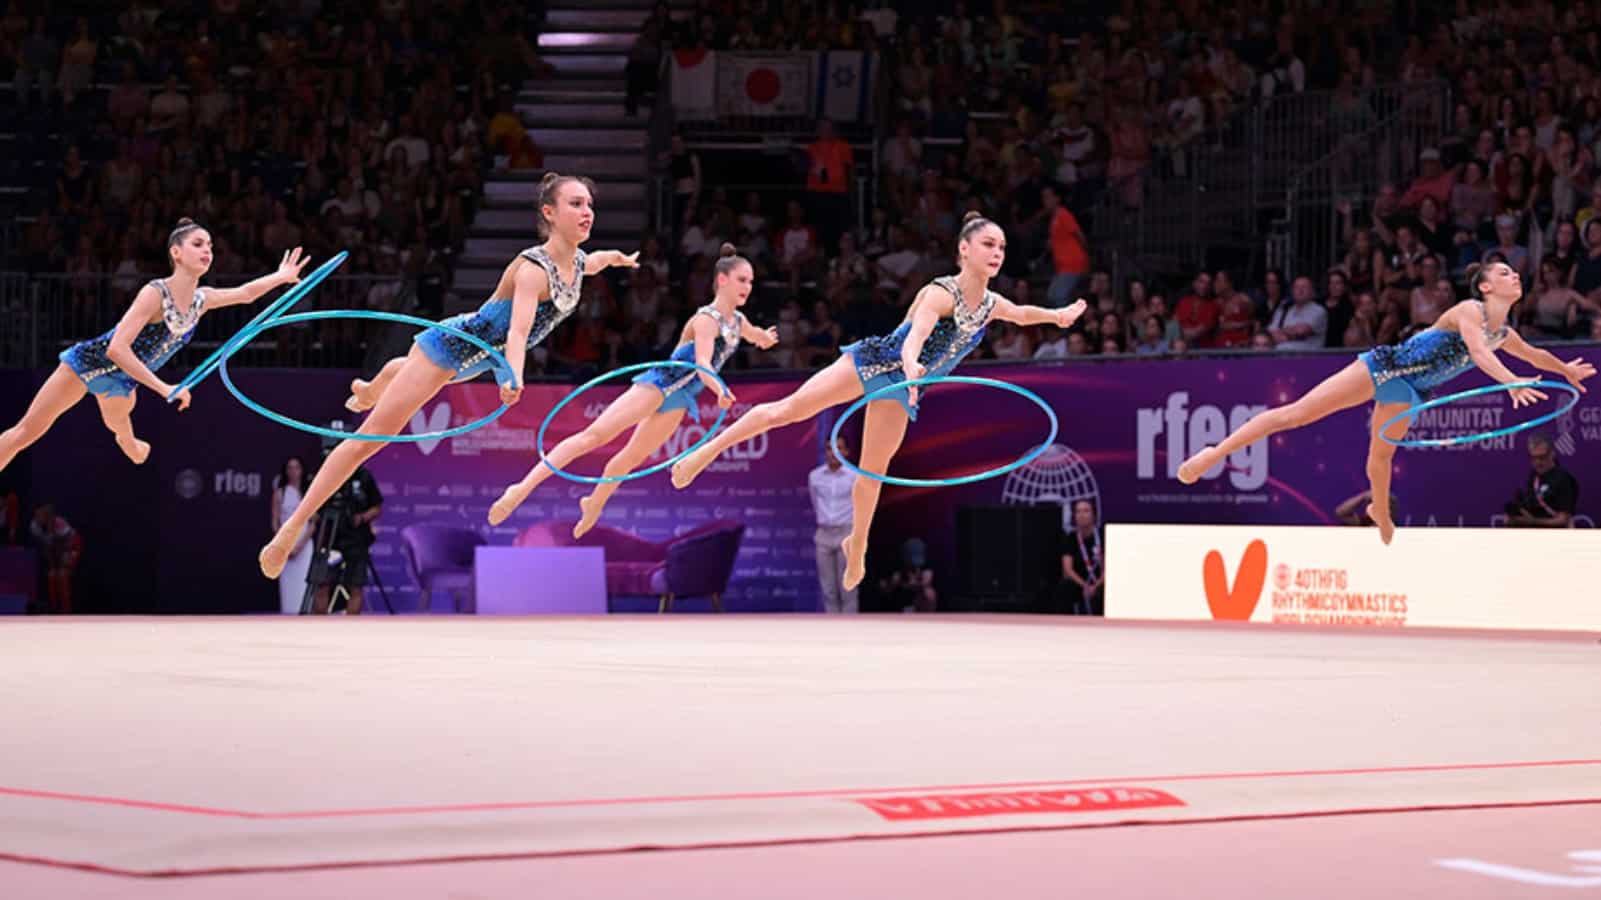 Israel's gold medal rhythmic gymnastics team in action at the World Championships in Spain, August 2023. Photo courtesy of FIG